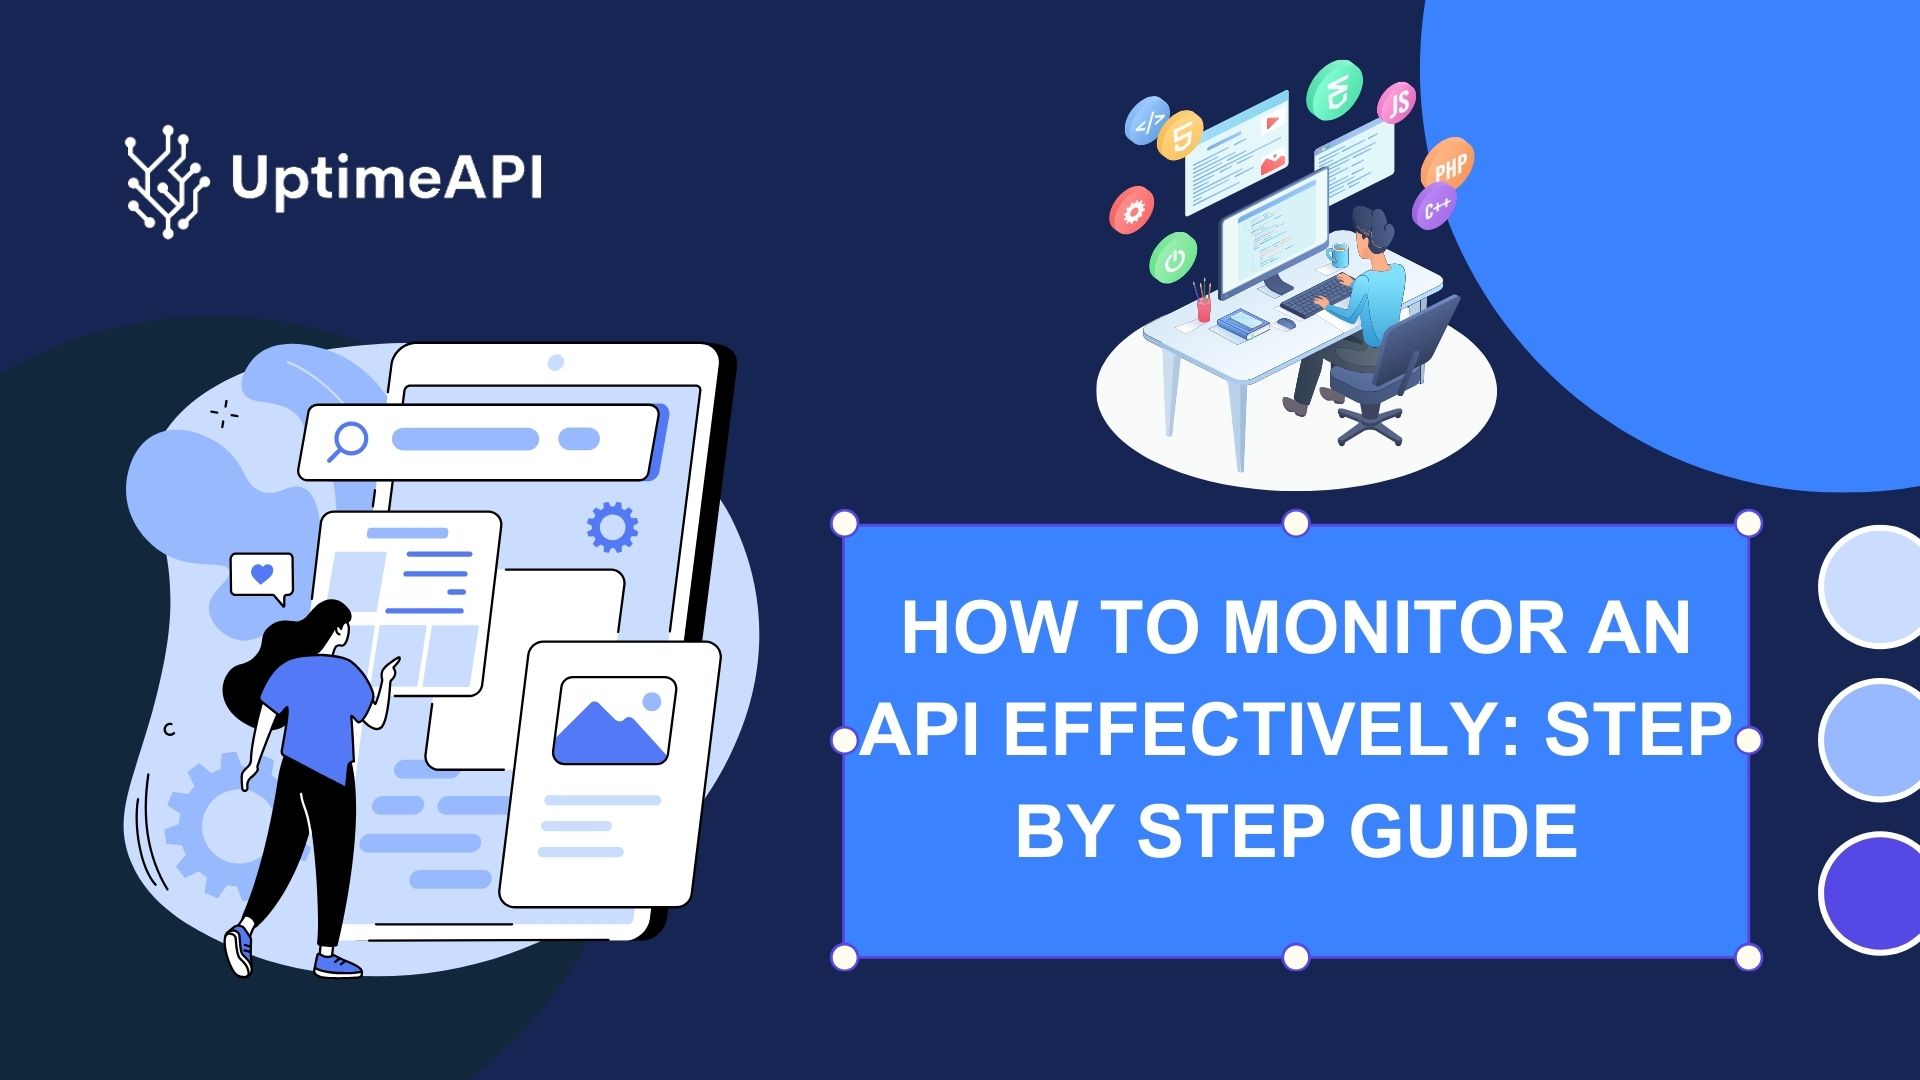 How To Monitor An API Effectively: Step By Step Guide